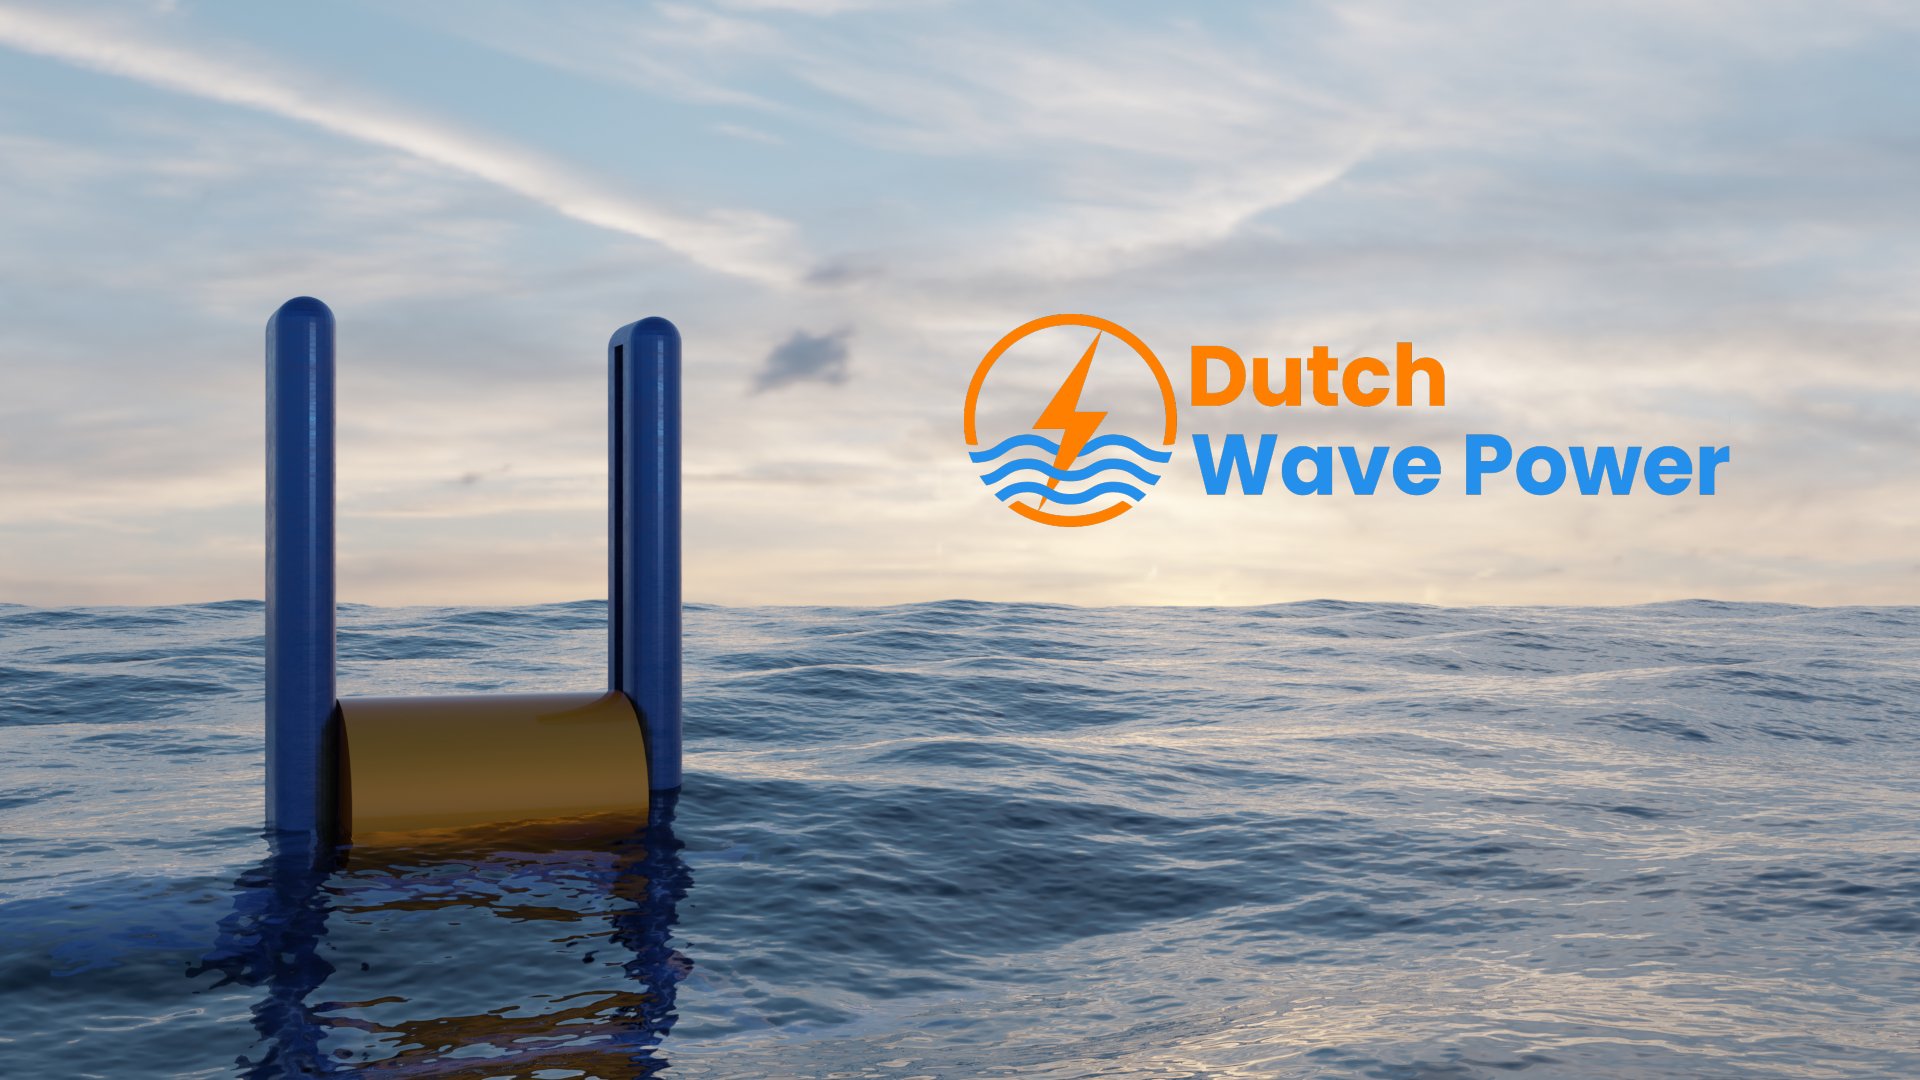 Dutch wave energy company receives funding for extensive technology testing